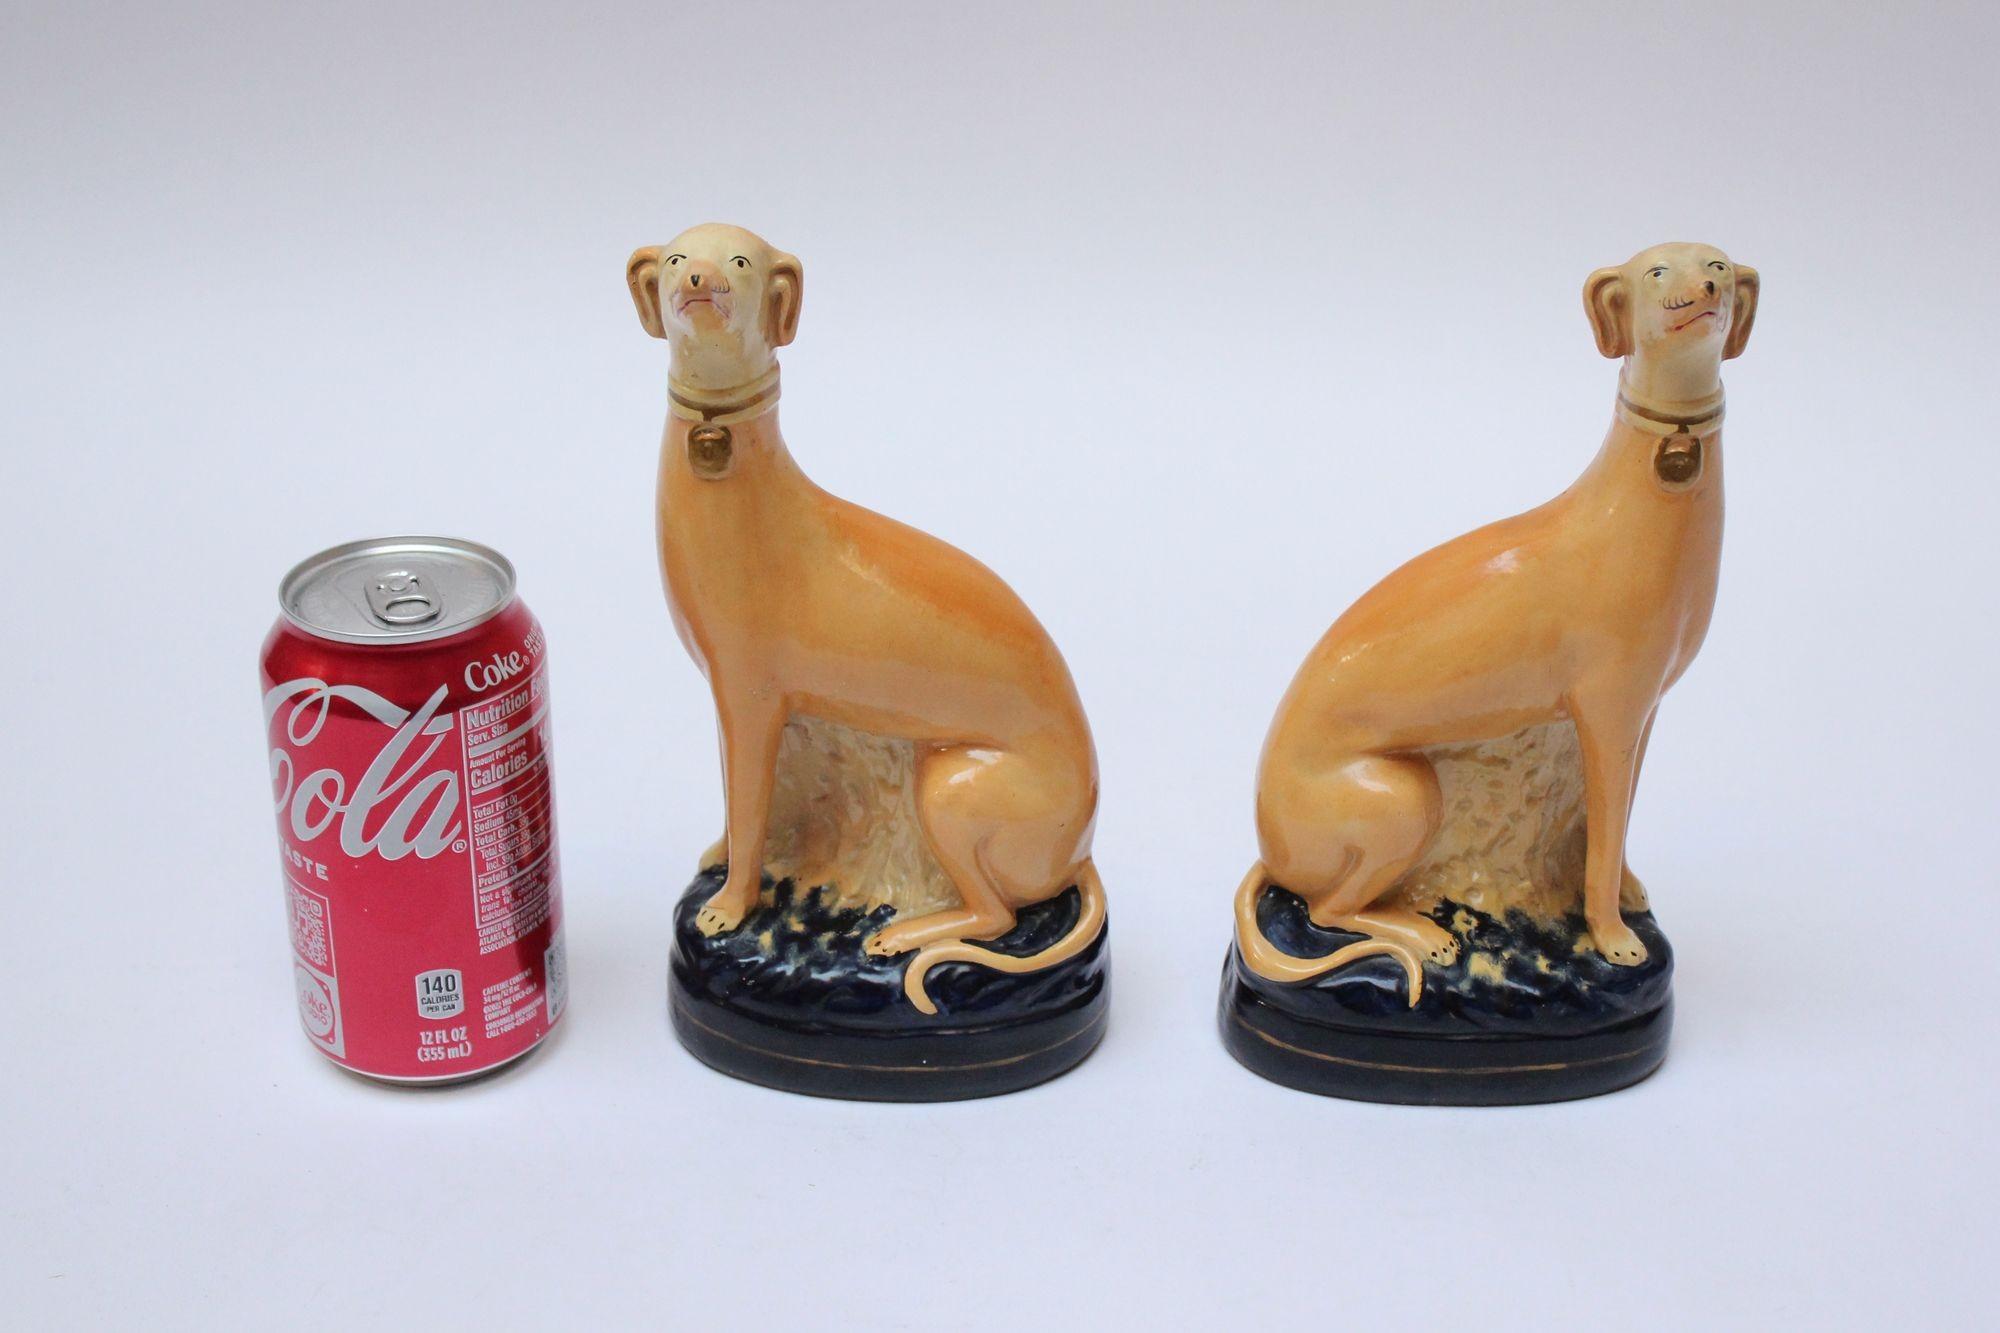 Pair of Vintage Italian Figural Porcelain Italian Greyhound Bookends by Borghese 1